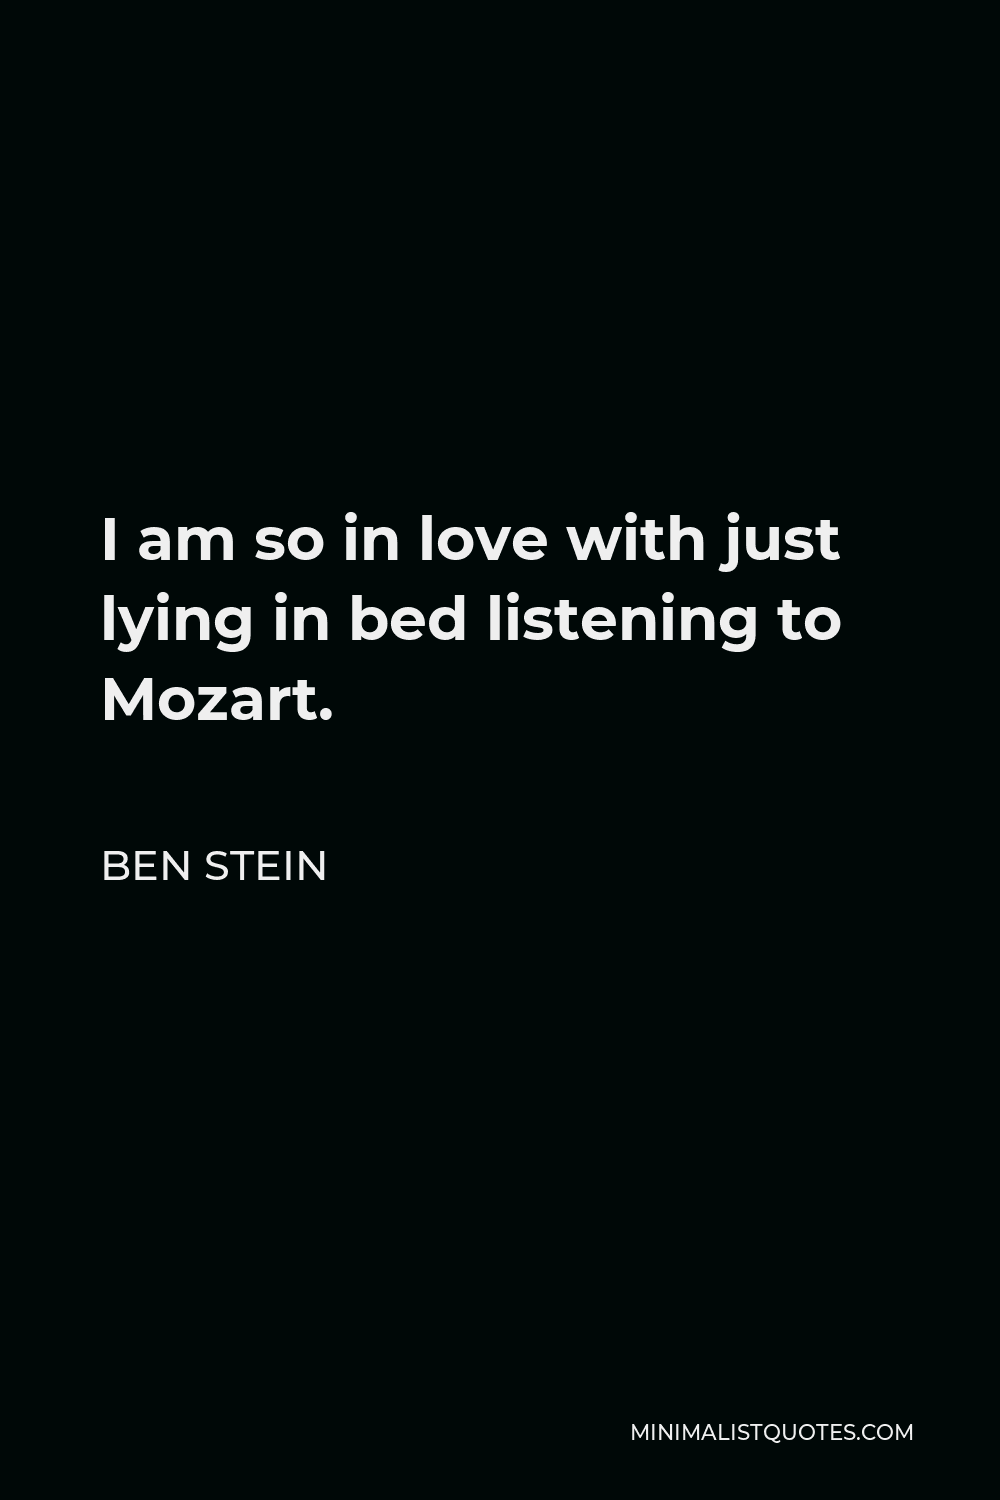 Ben Stein Quote - I am so in love with just lying in bed listening to Mozart.